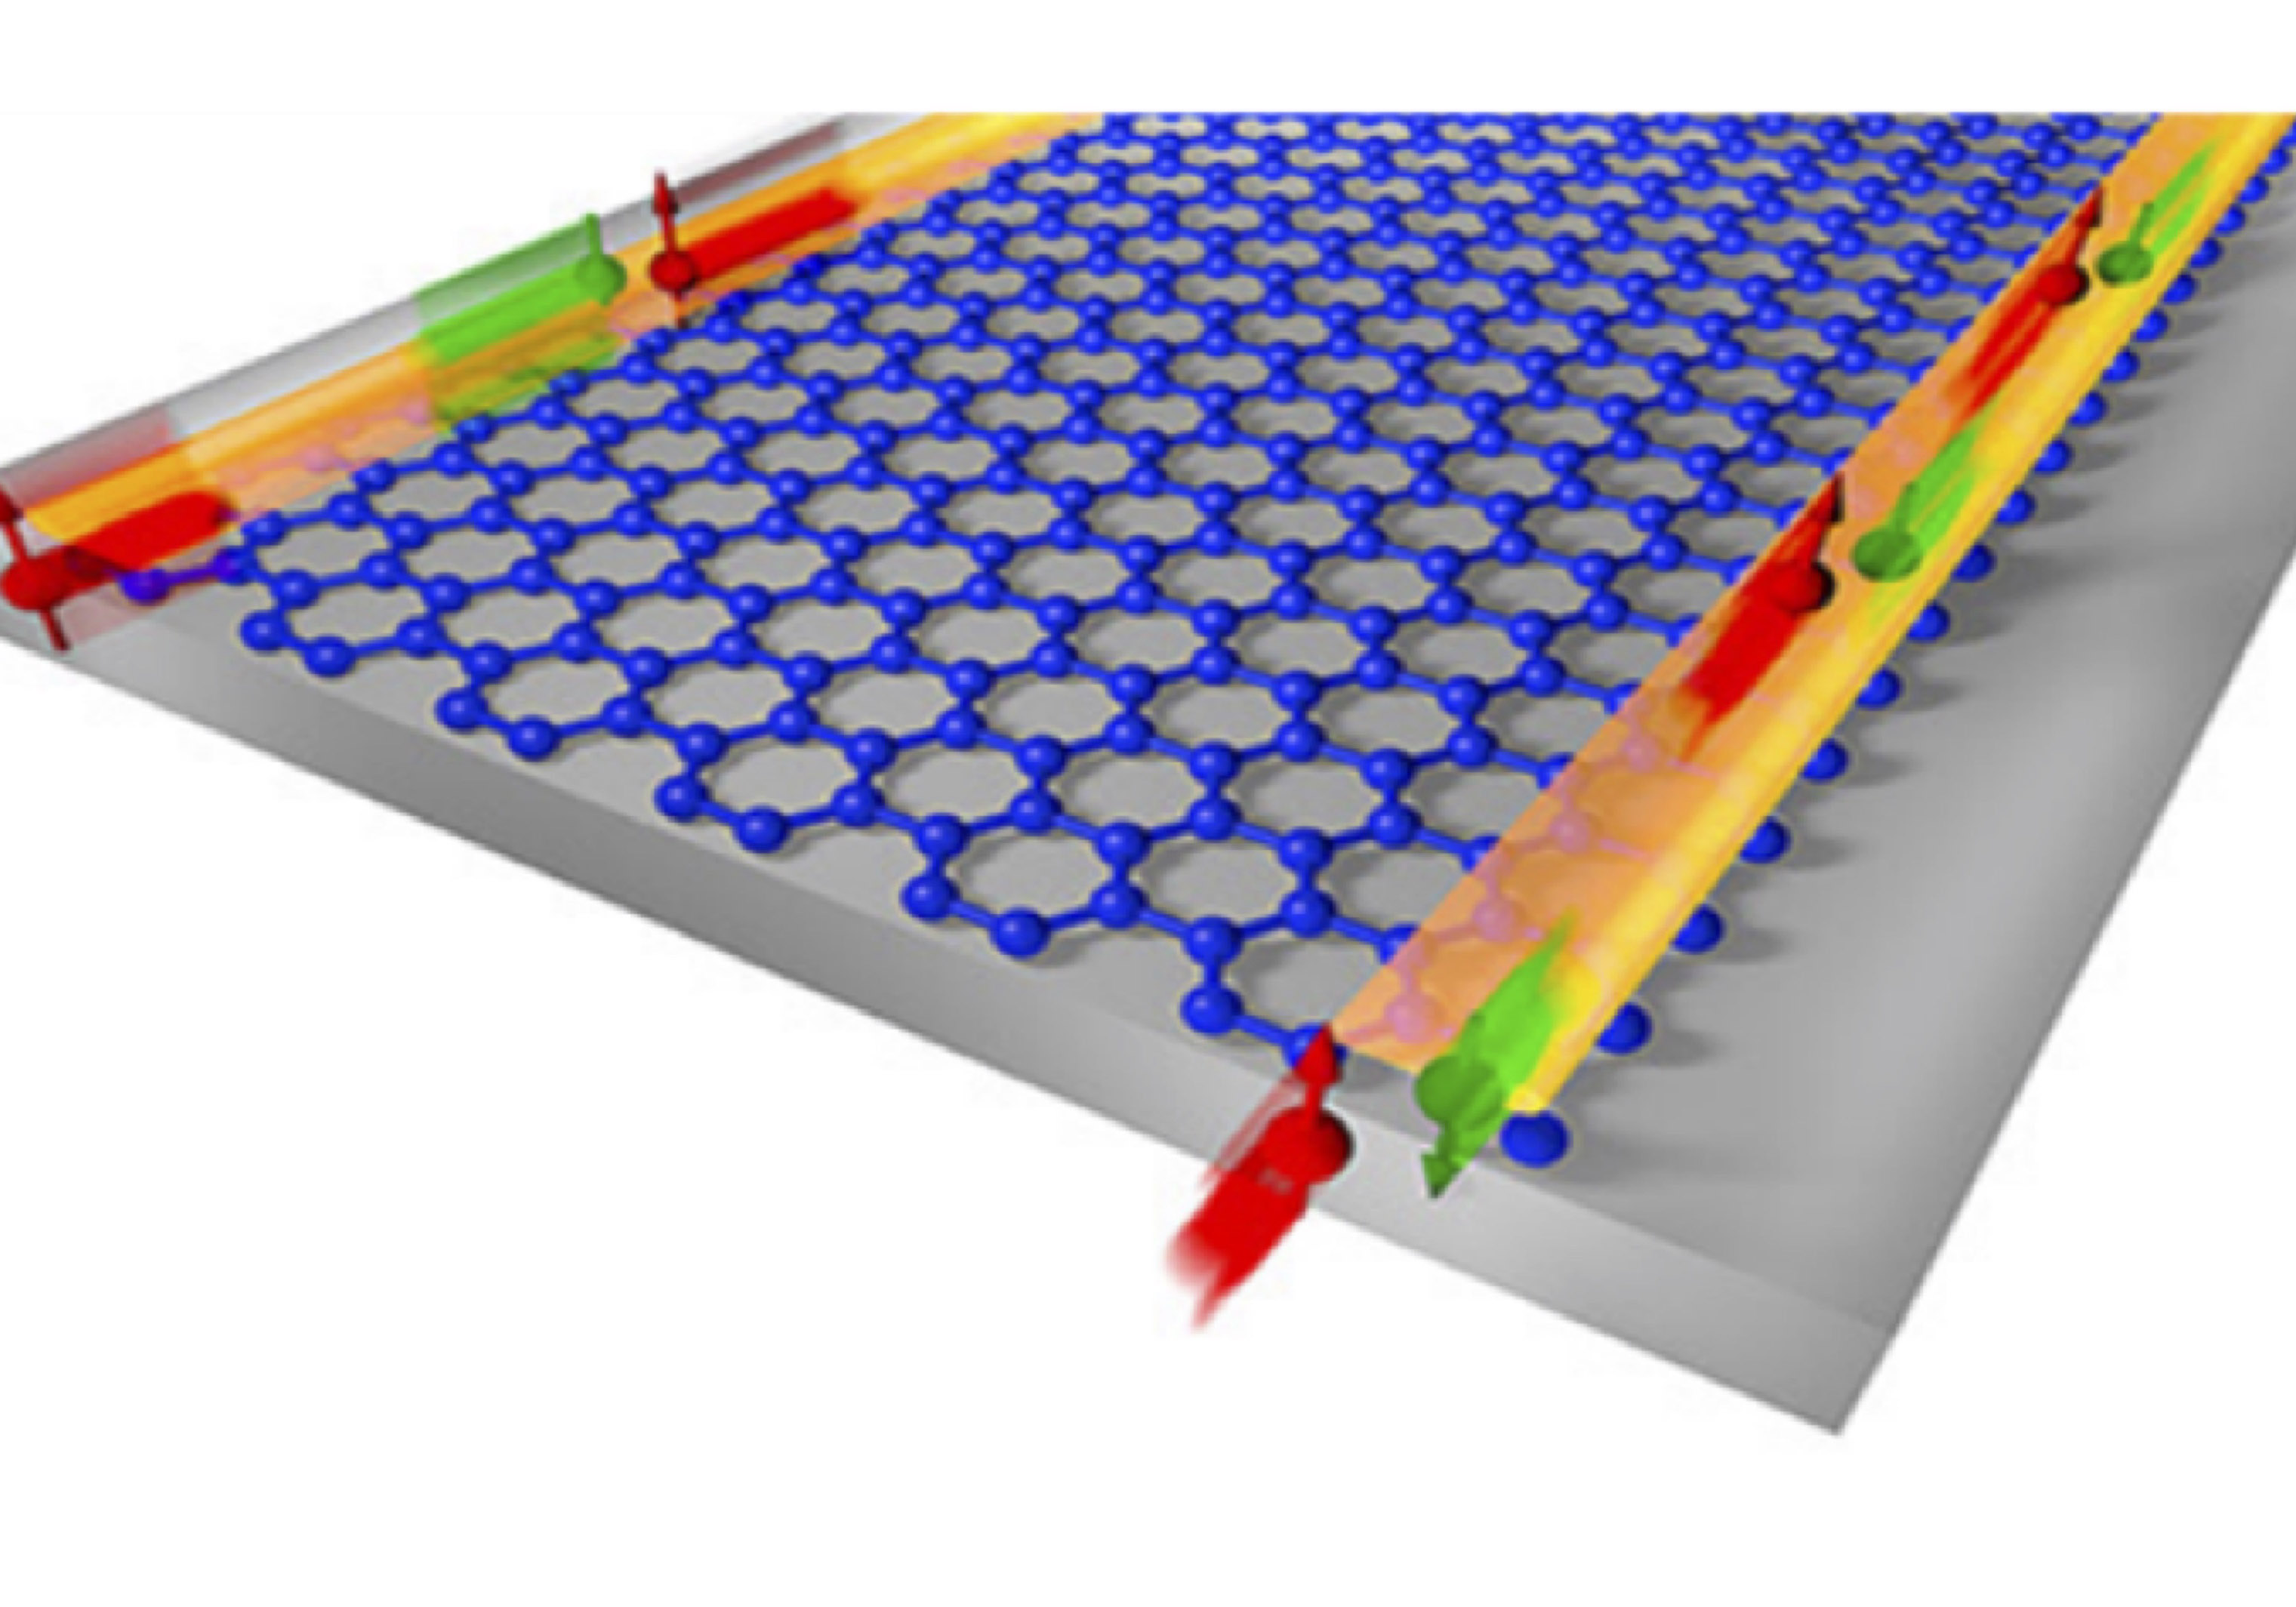 Researchers Discover Candidate Material for Room-Temperature Quantum Spin Hall Effect